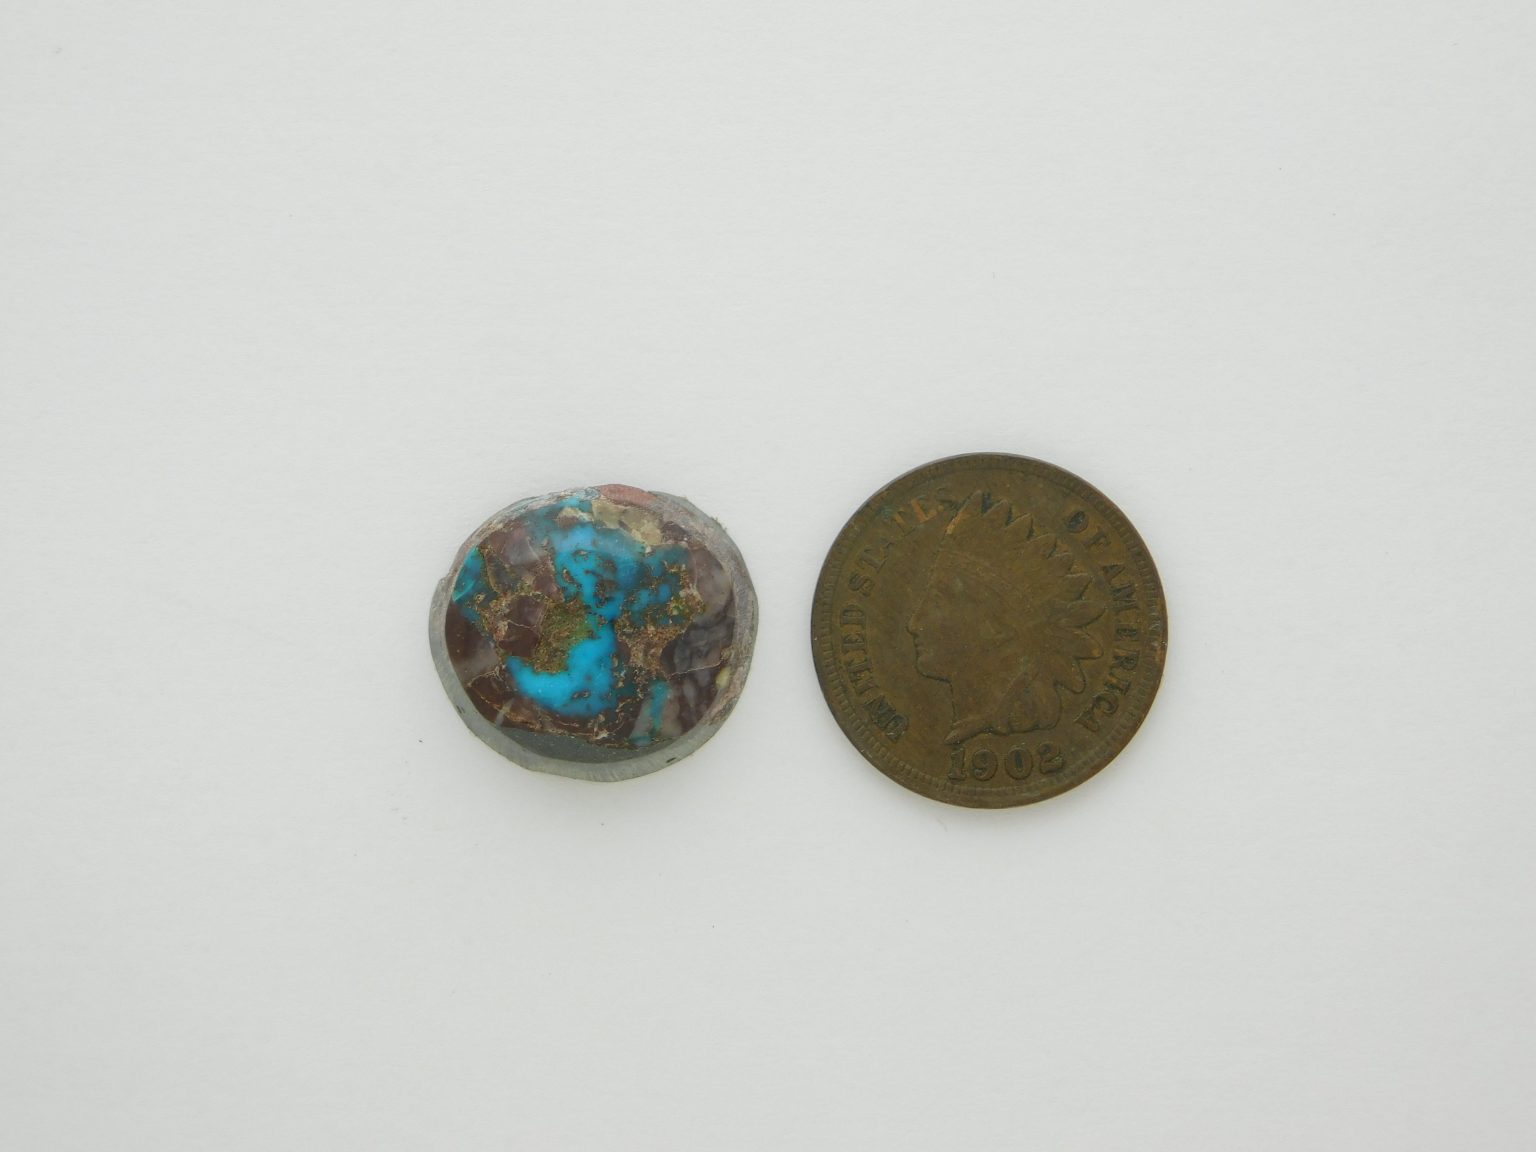 BISBEE TURQUOISE CABOCHON 11 CARATS